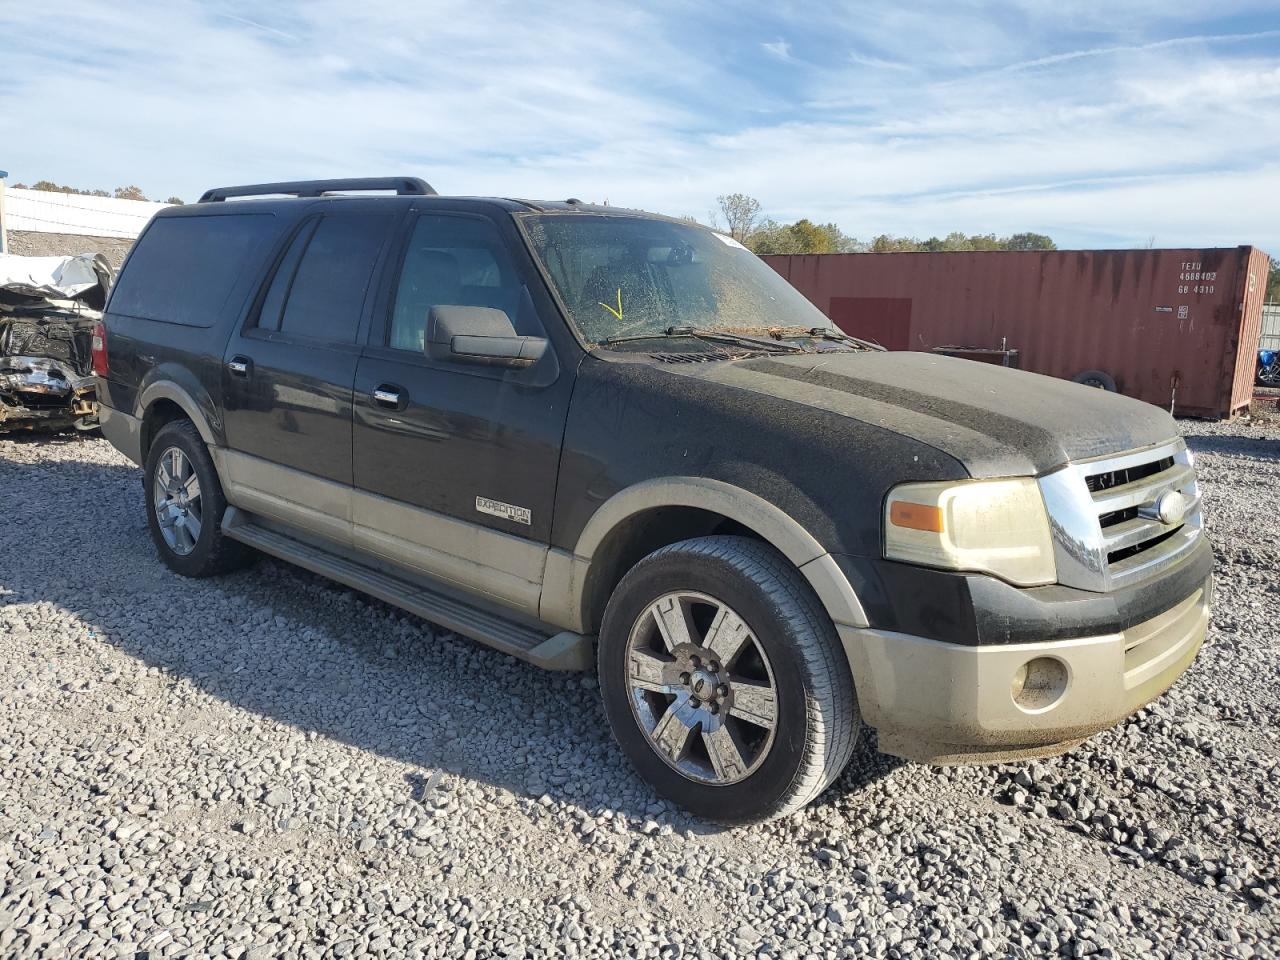 1FMFK17587L****** Salvage and Wrecked 2007 Ford Expedition in Alabama State